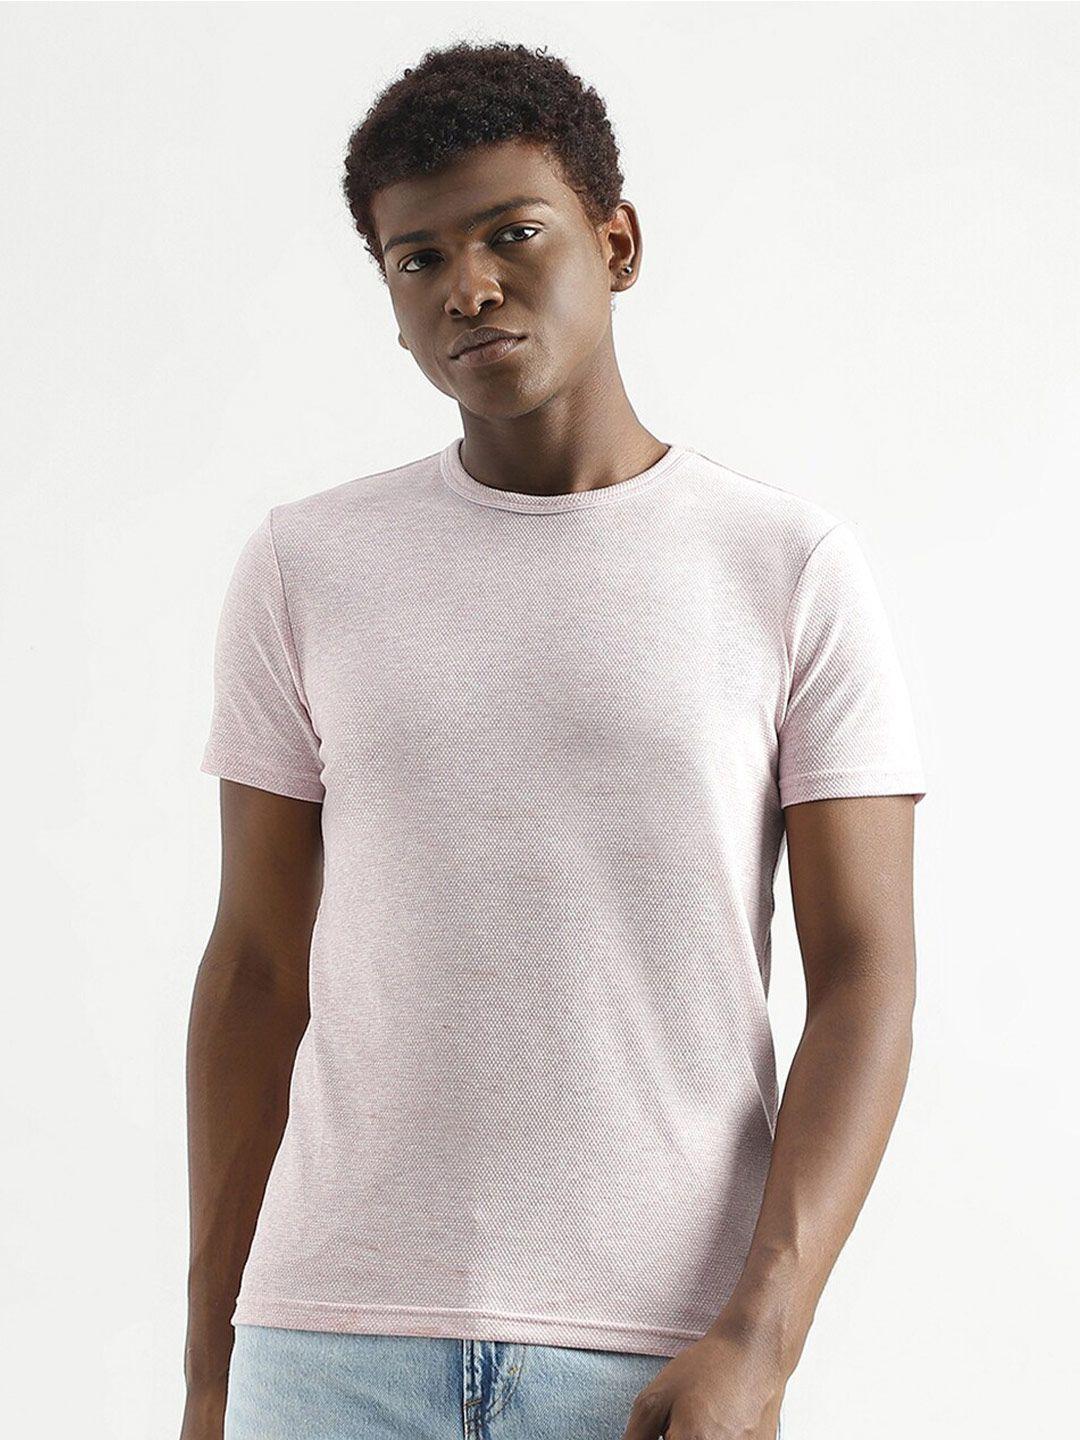 united colors of benetton round neck self design t-shirt